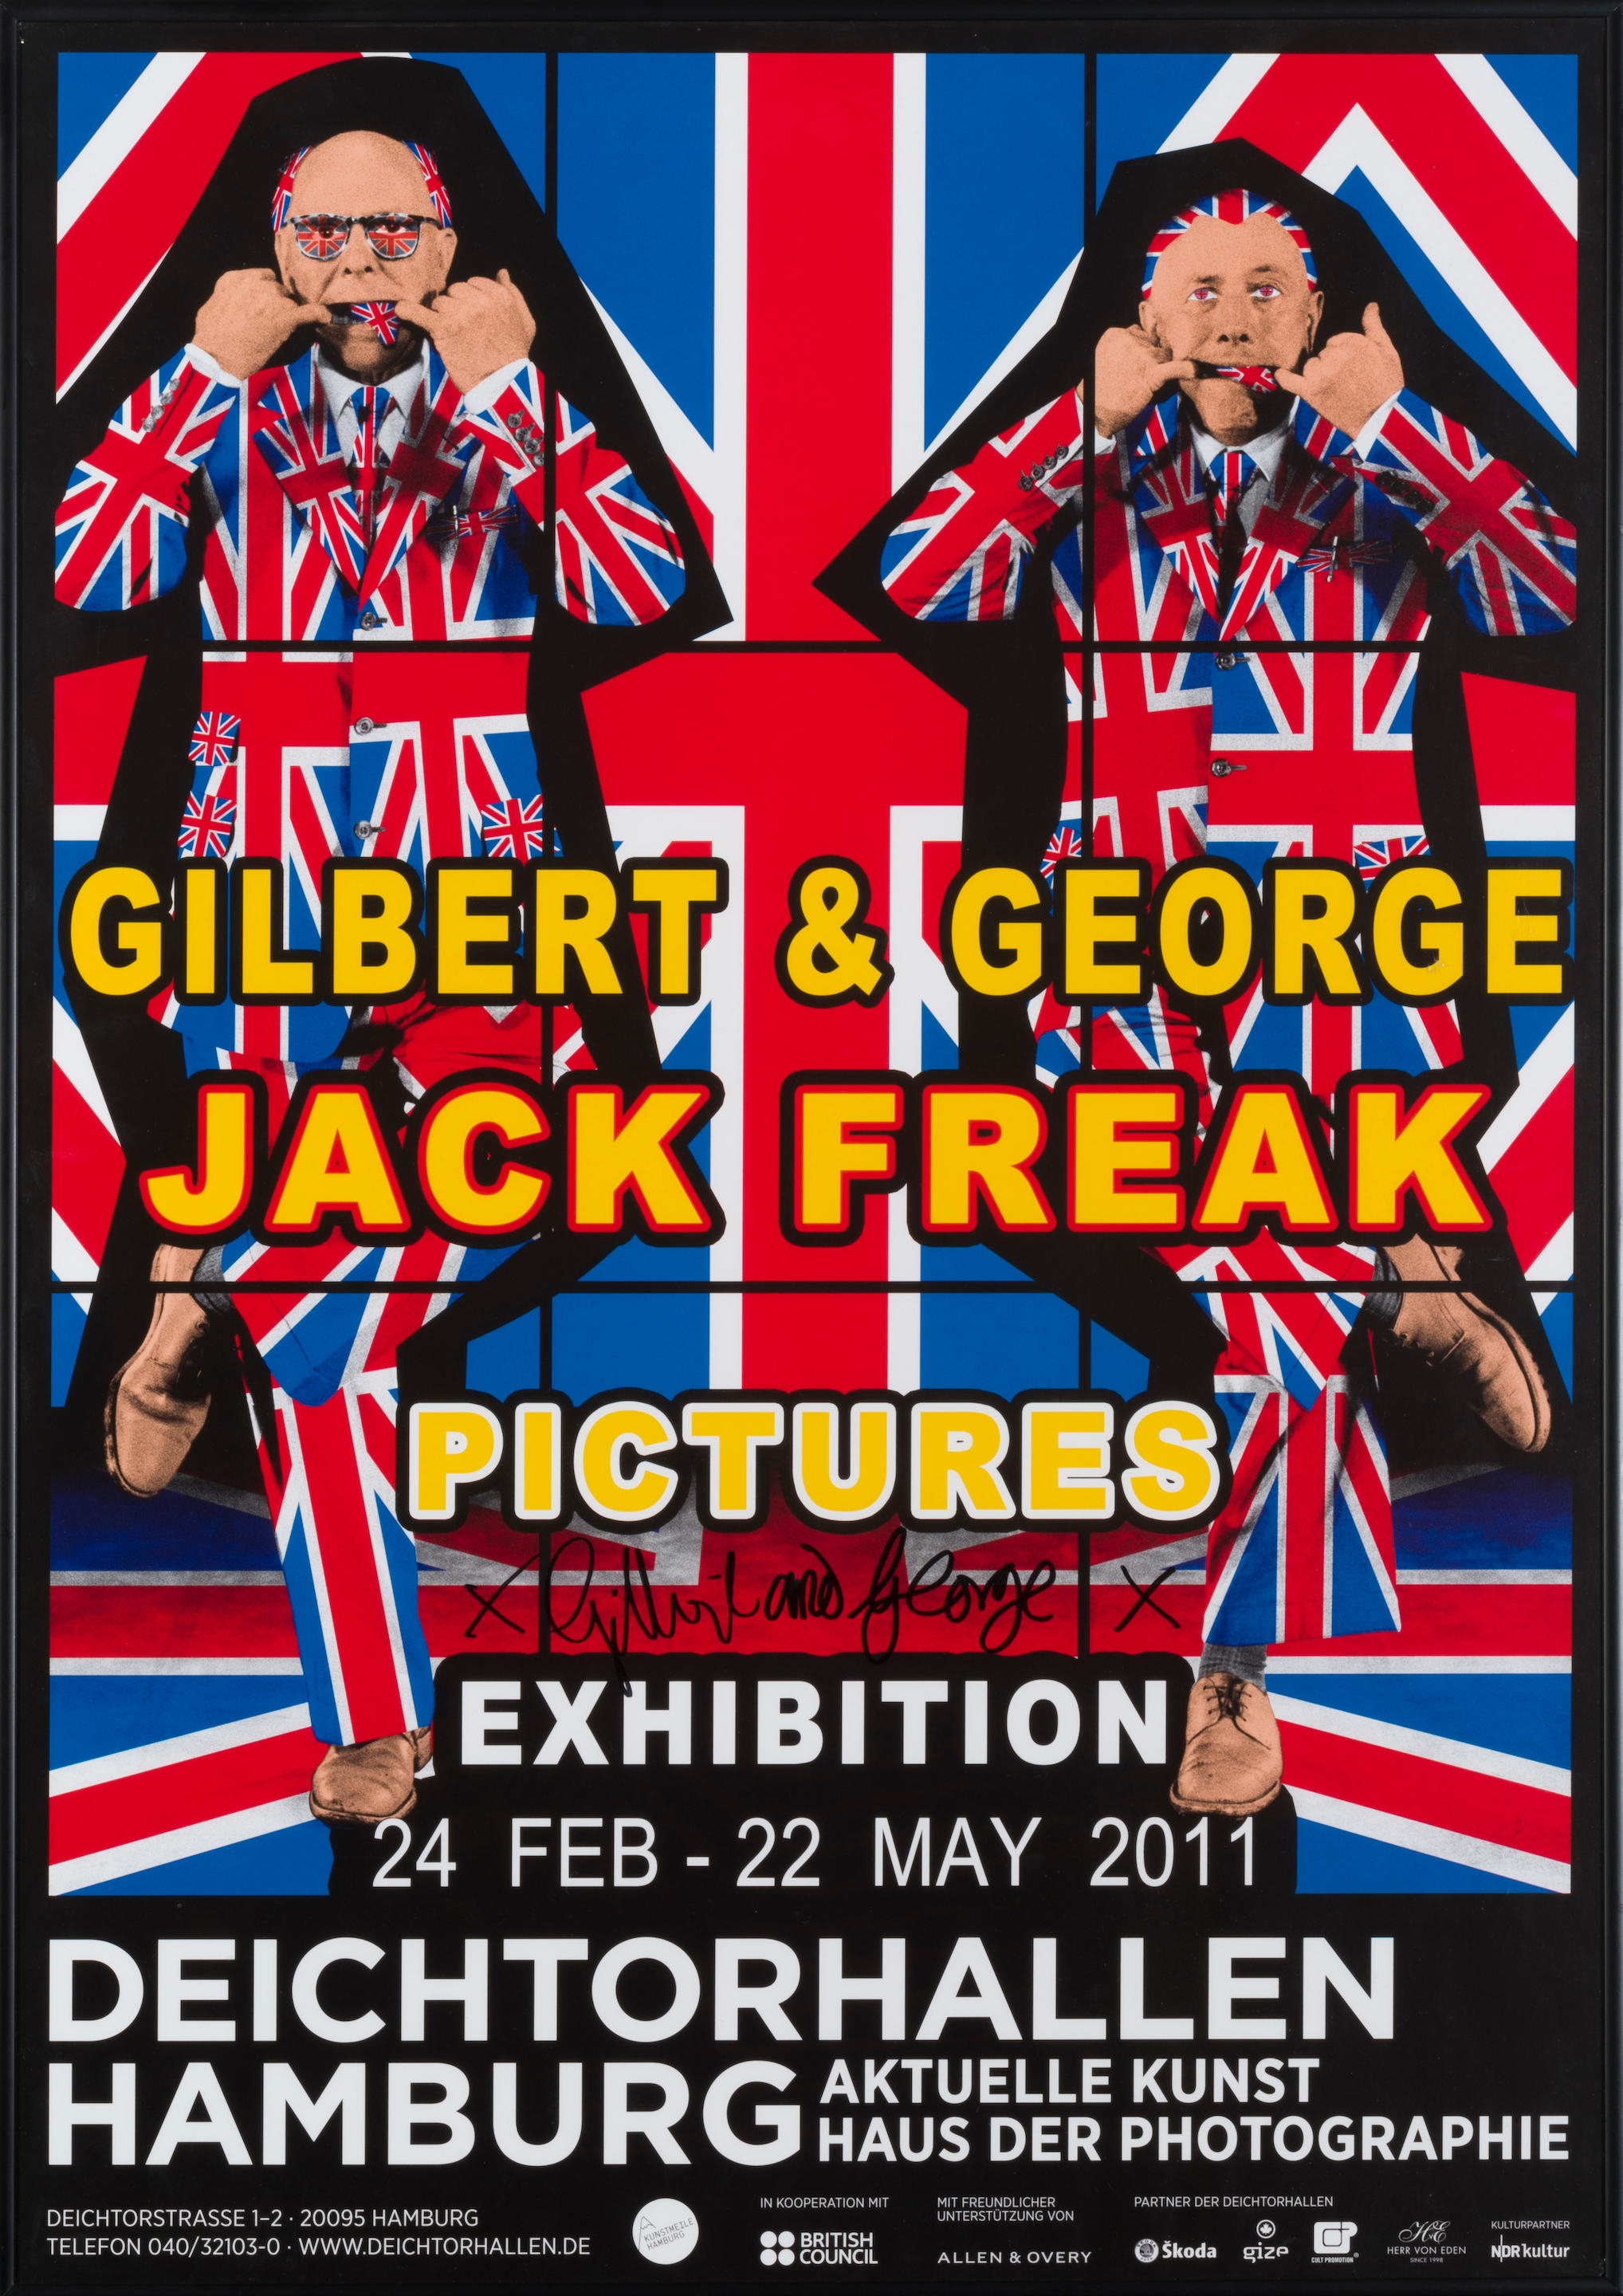 Jack freak Pictures,	2011 by Gilbert & George, 2011